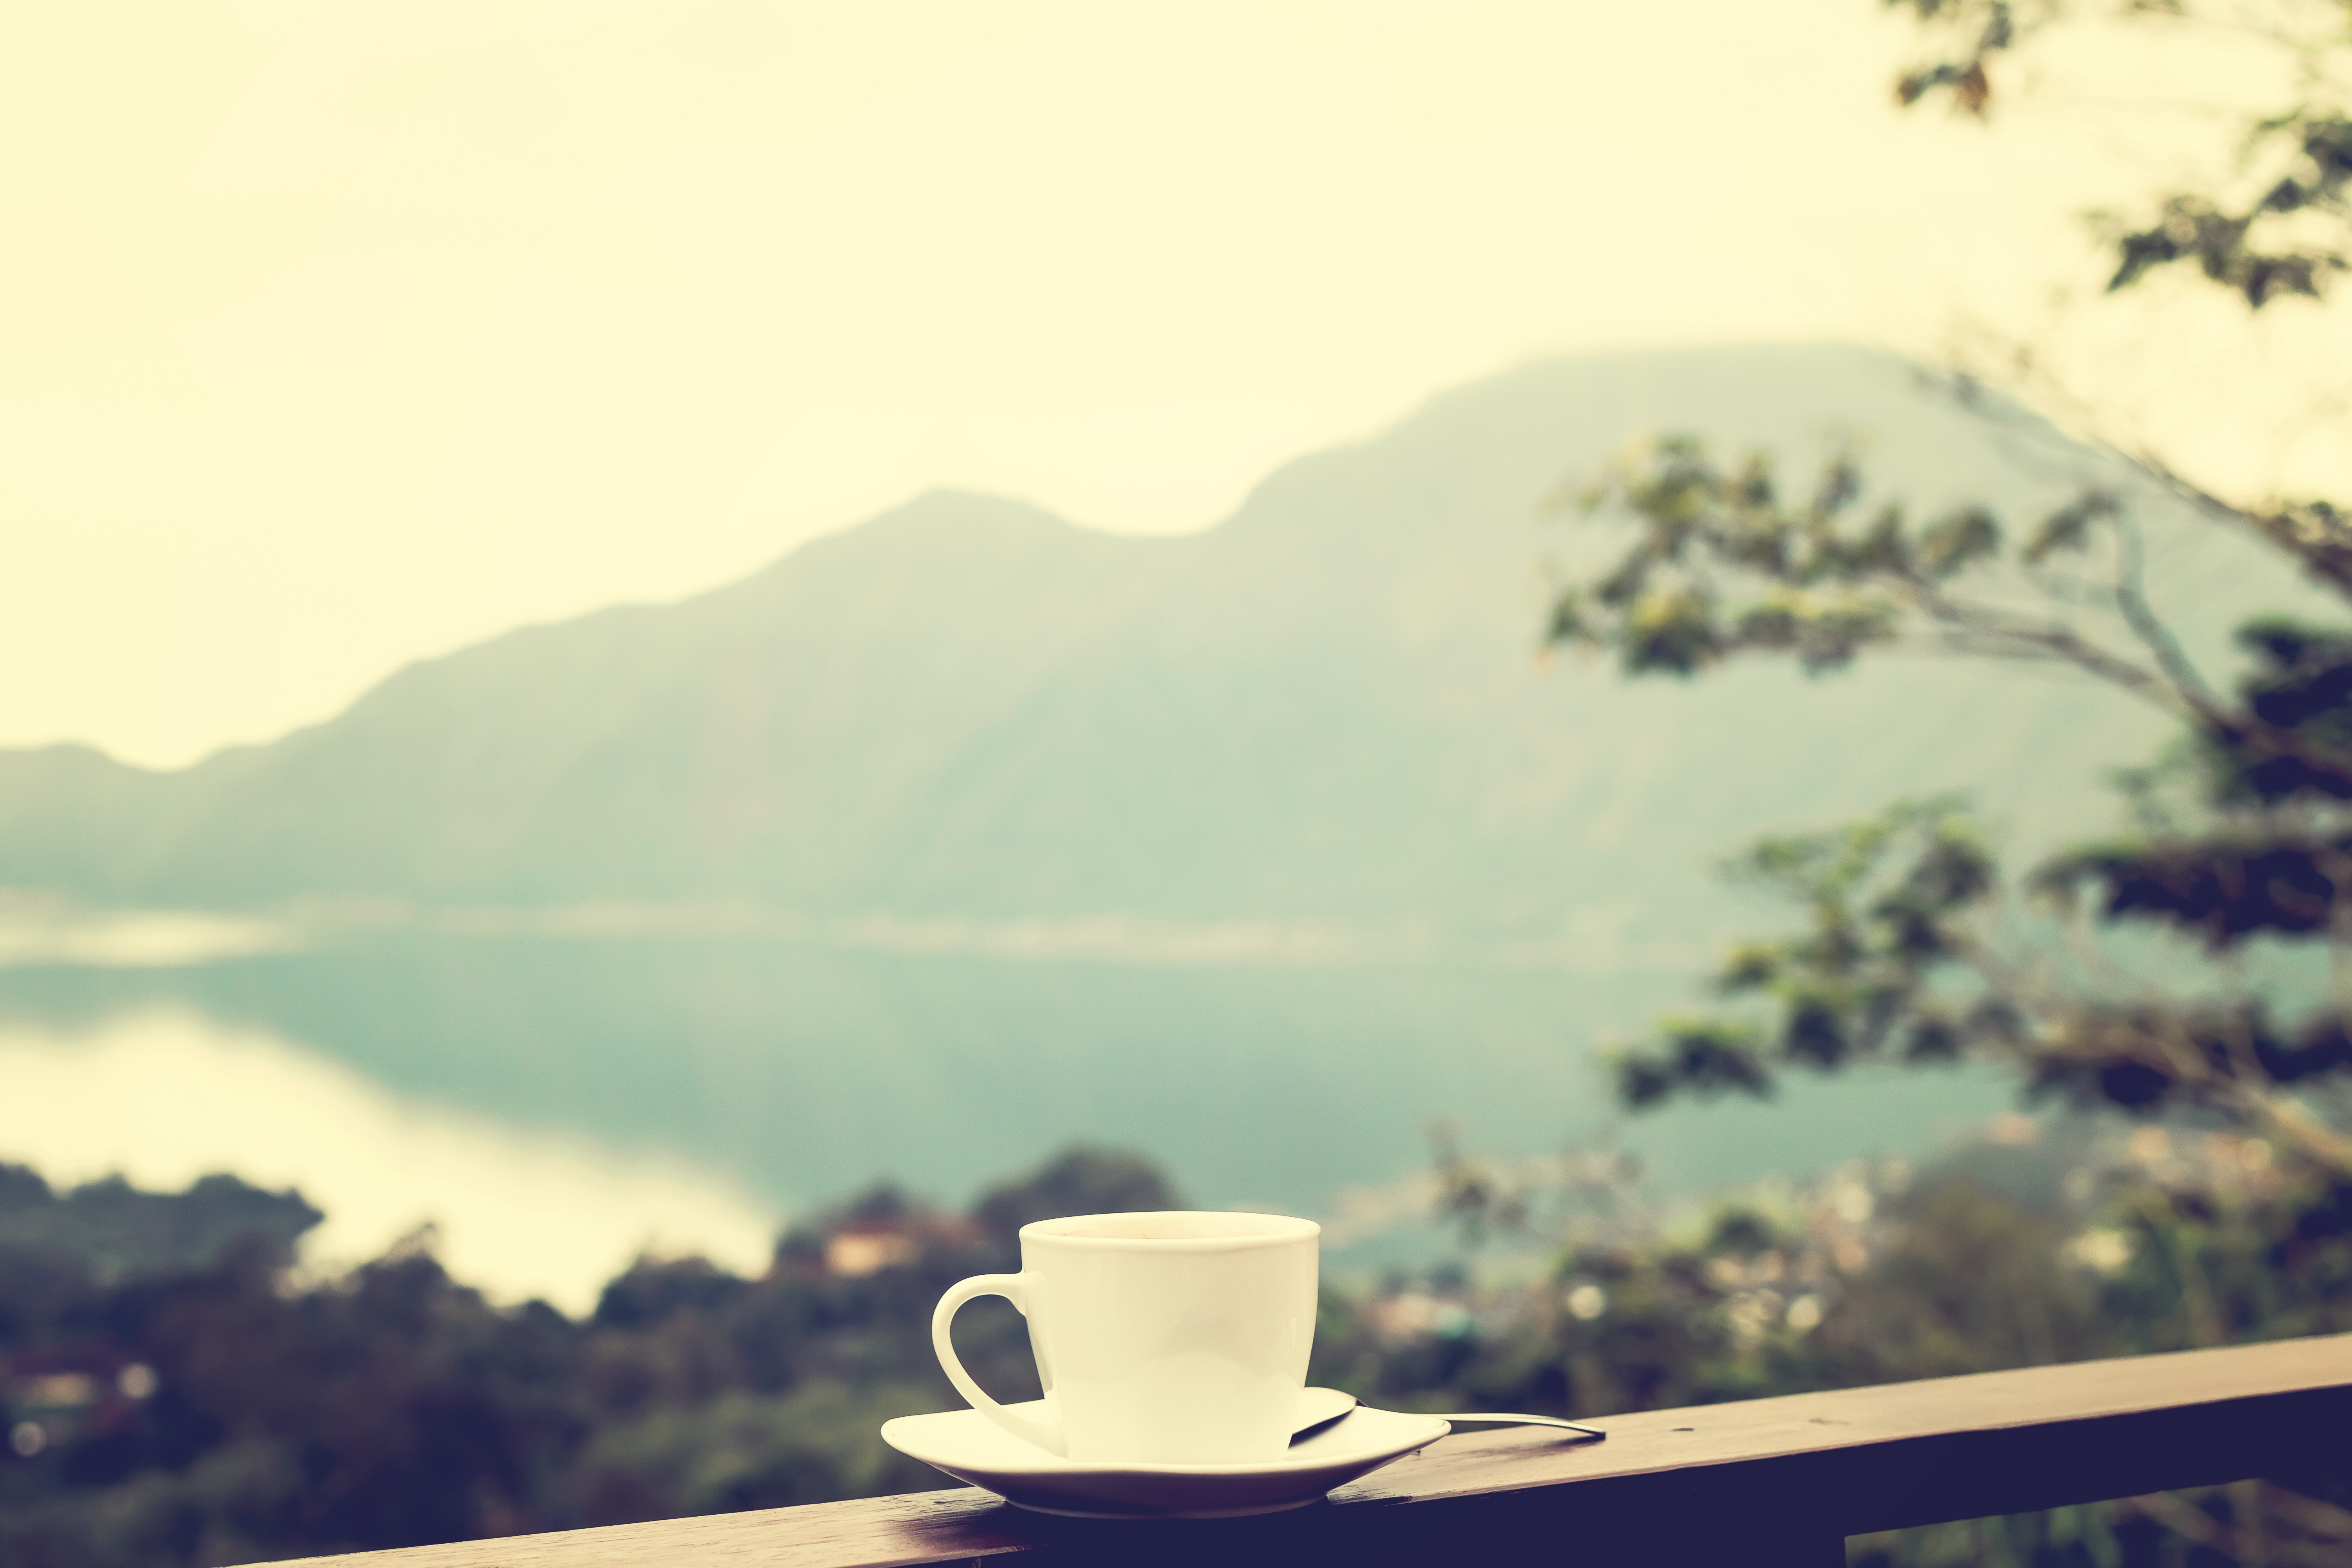 freedom, mountains, privacy, seclusion, miscellanea, miscellaneous, cup, mood